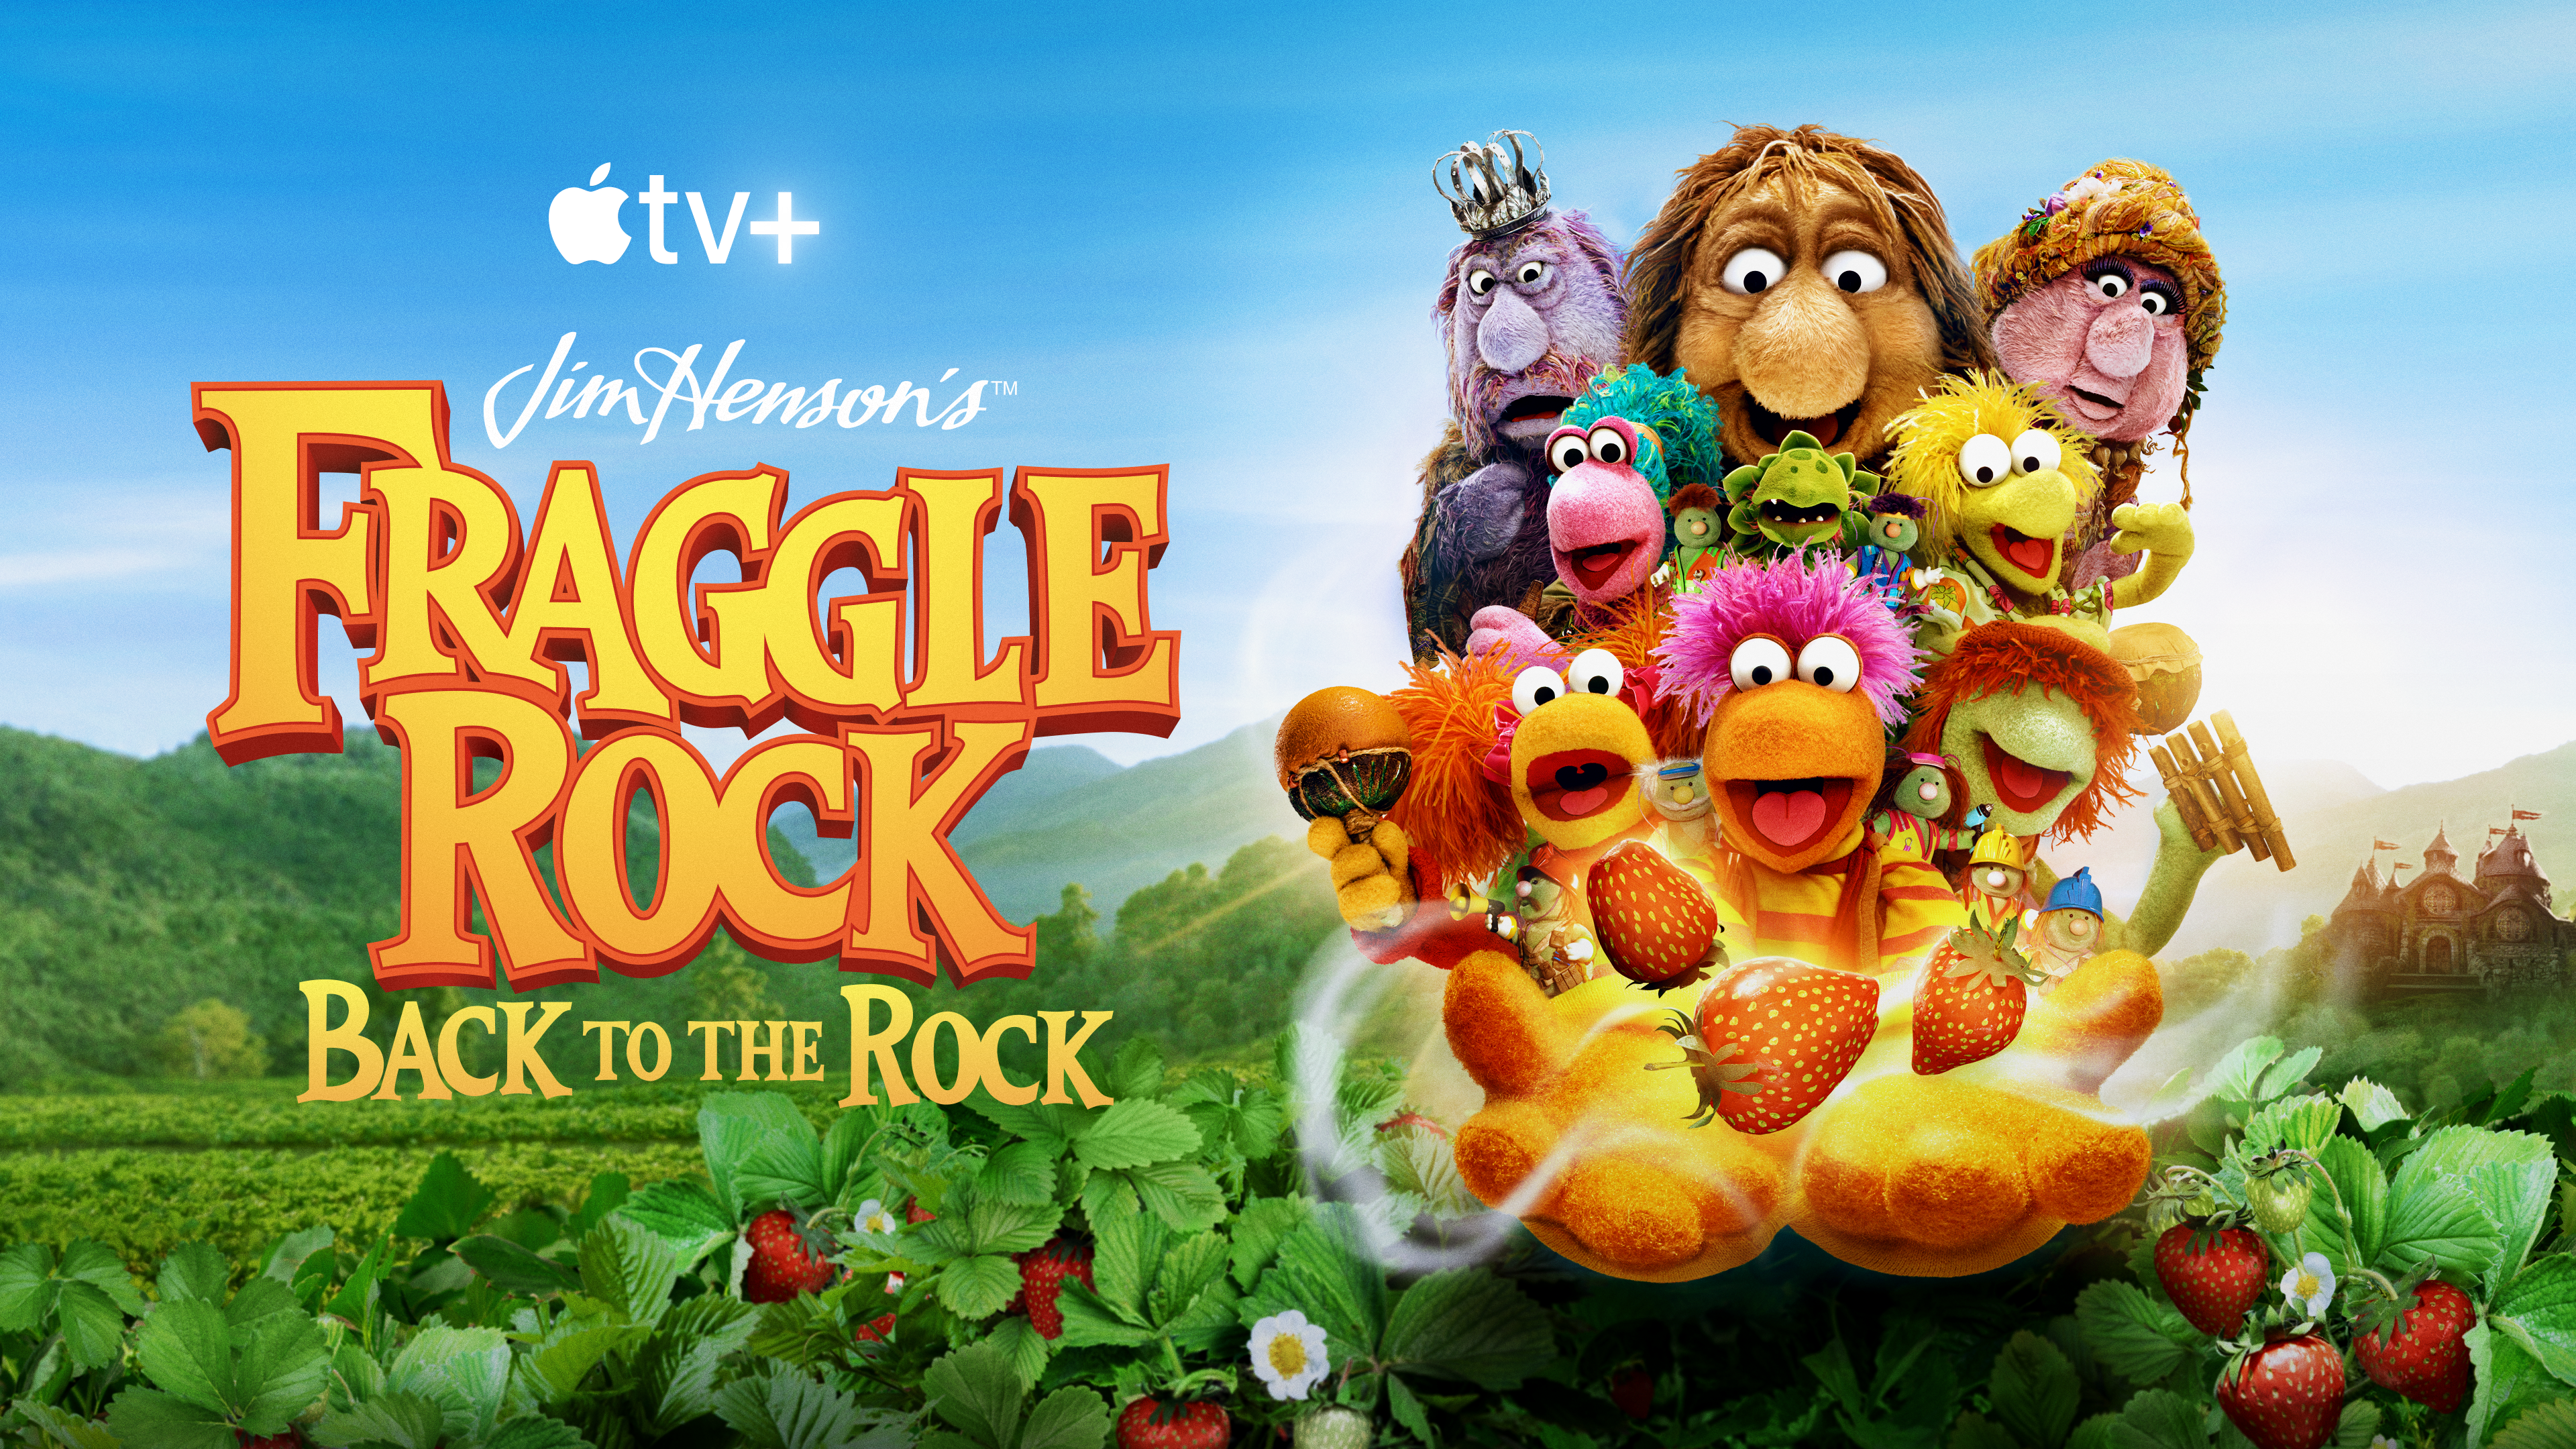 ‘Fraggle Rock: Back To The Rock’ Season 2 Has More Whimsy, More Music & More Beautiful Stories To Tell – Review